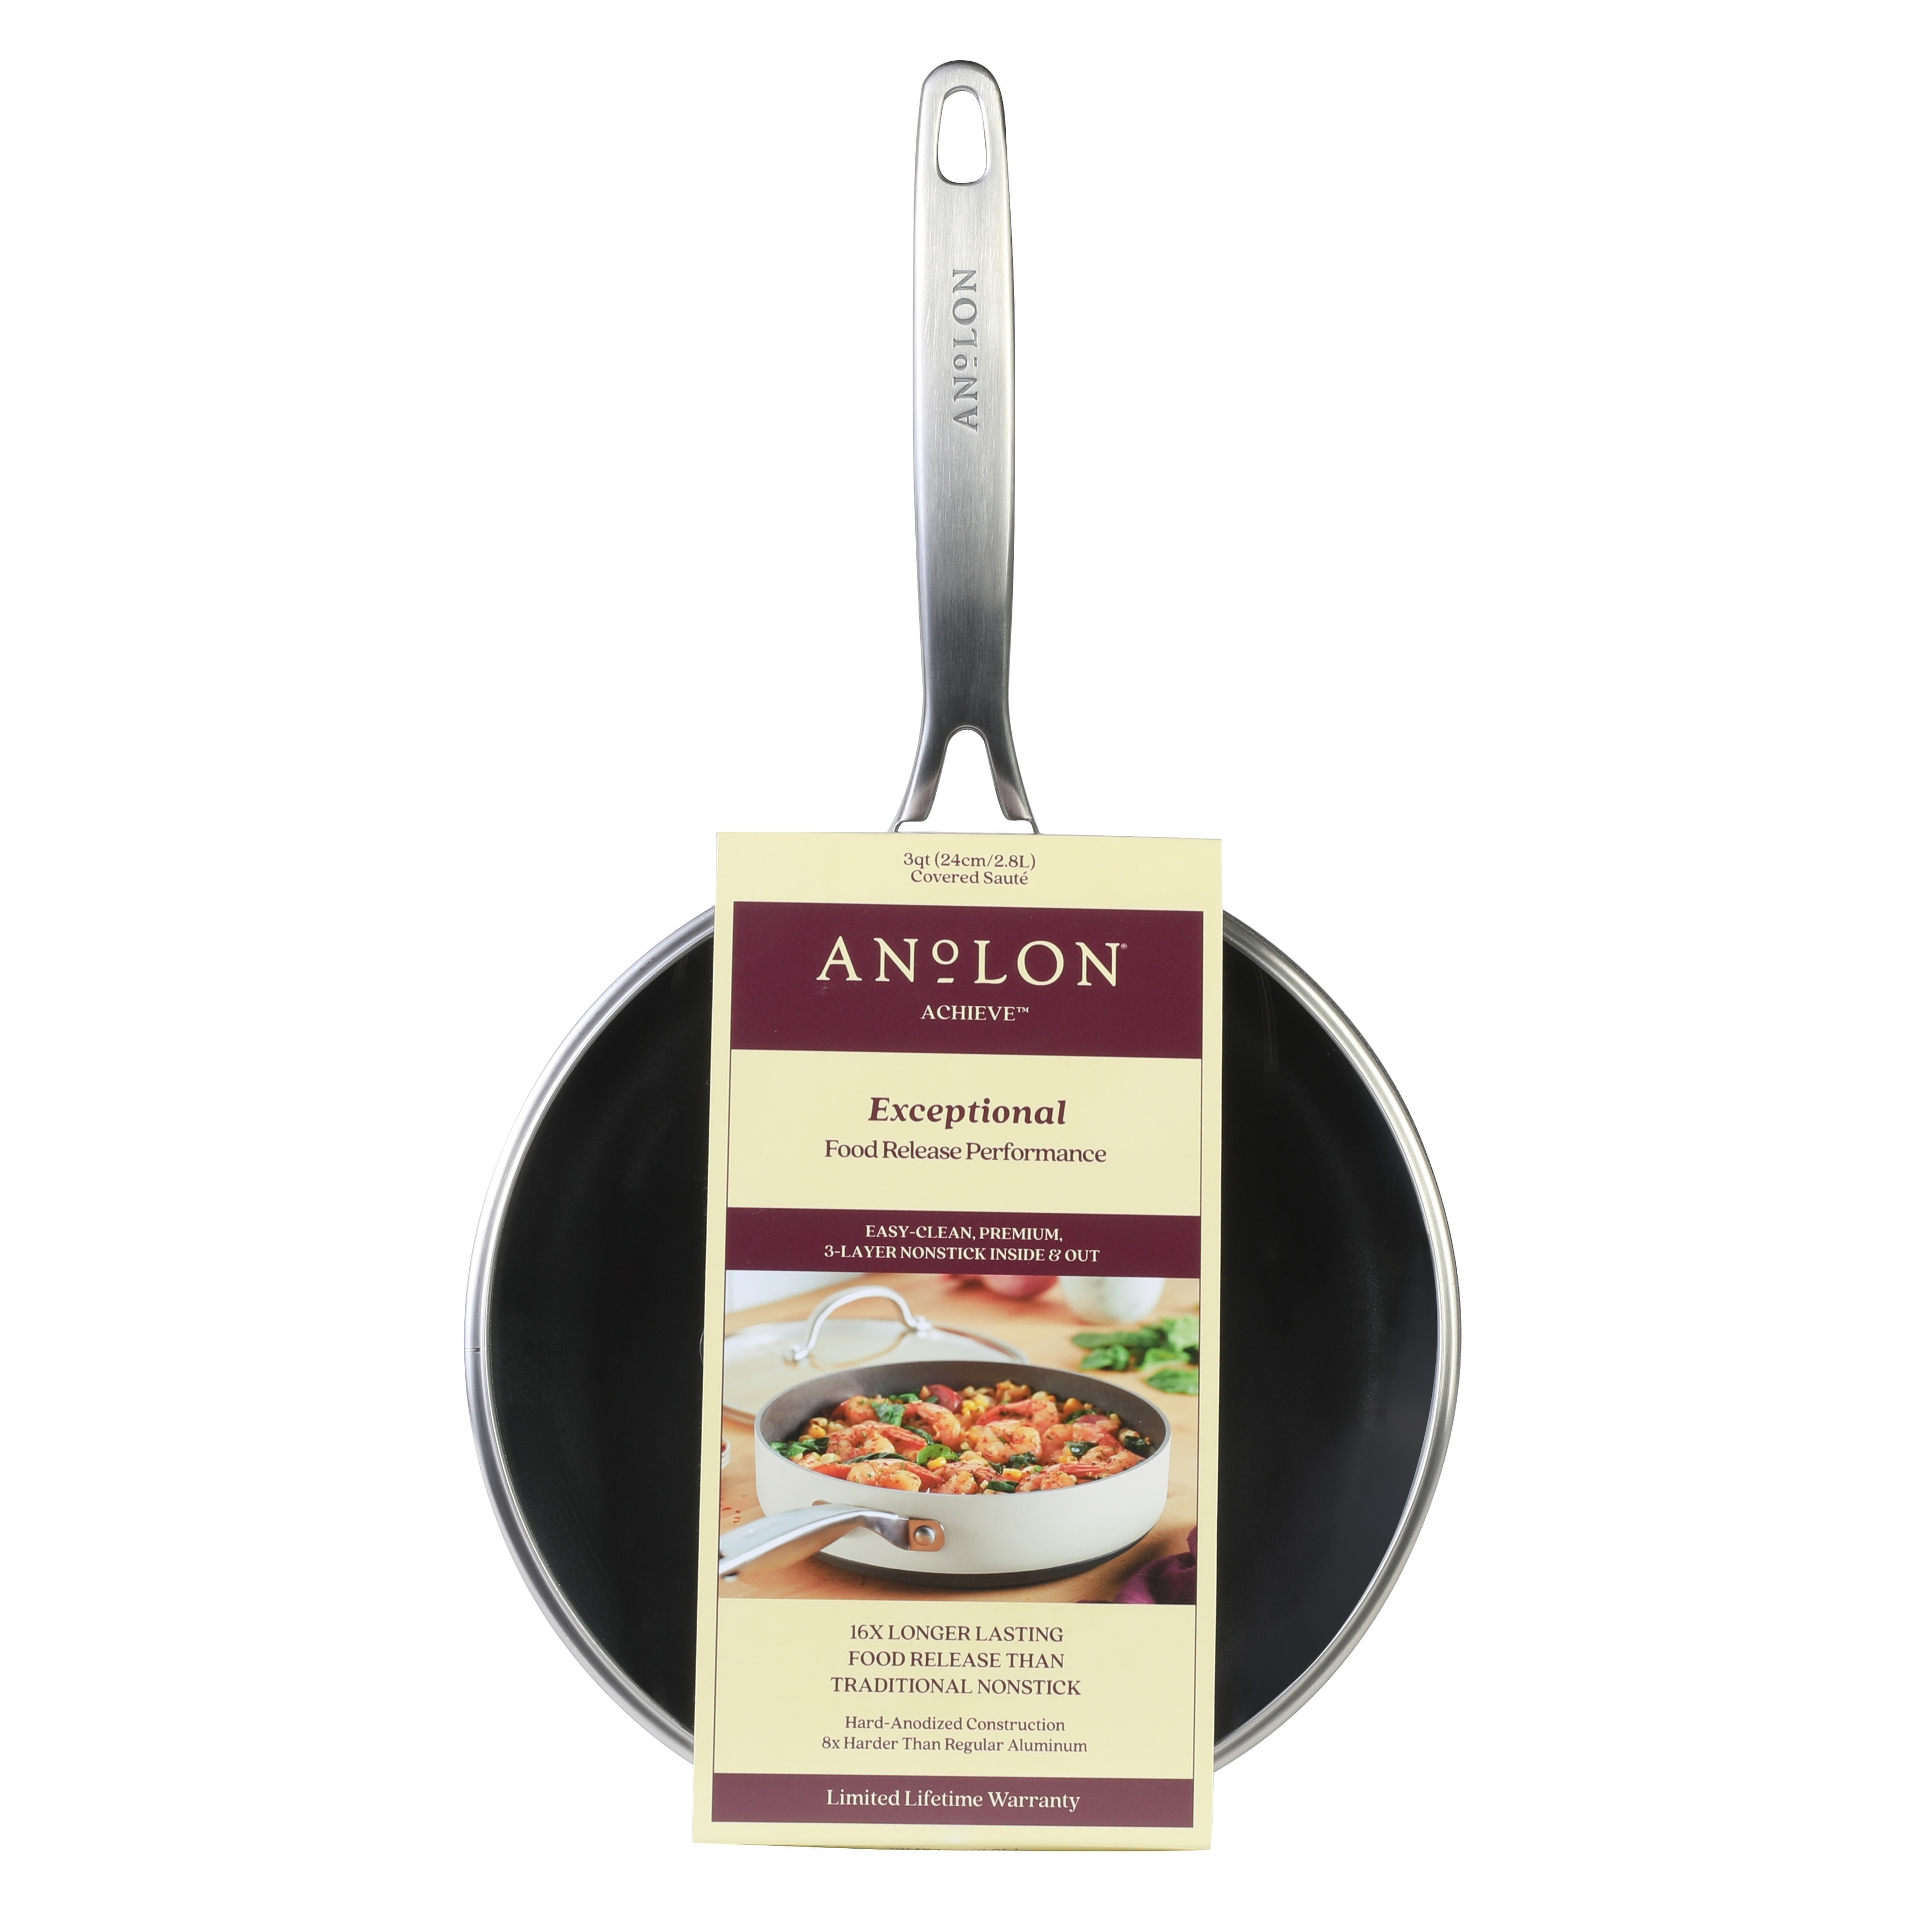 https://ak1.ostkcdn.com/images/products/is/images/direct/f19fadaf7f349c4cdb4a2c7513447b60bb935f06/Anolon-Achieve-Hard-Anodized-Nonstick-Saut%C3%A9-Pan-with-Lid%2C-3-Quart.jpg